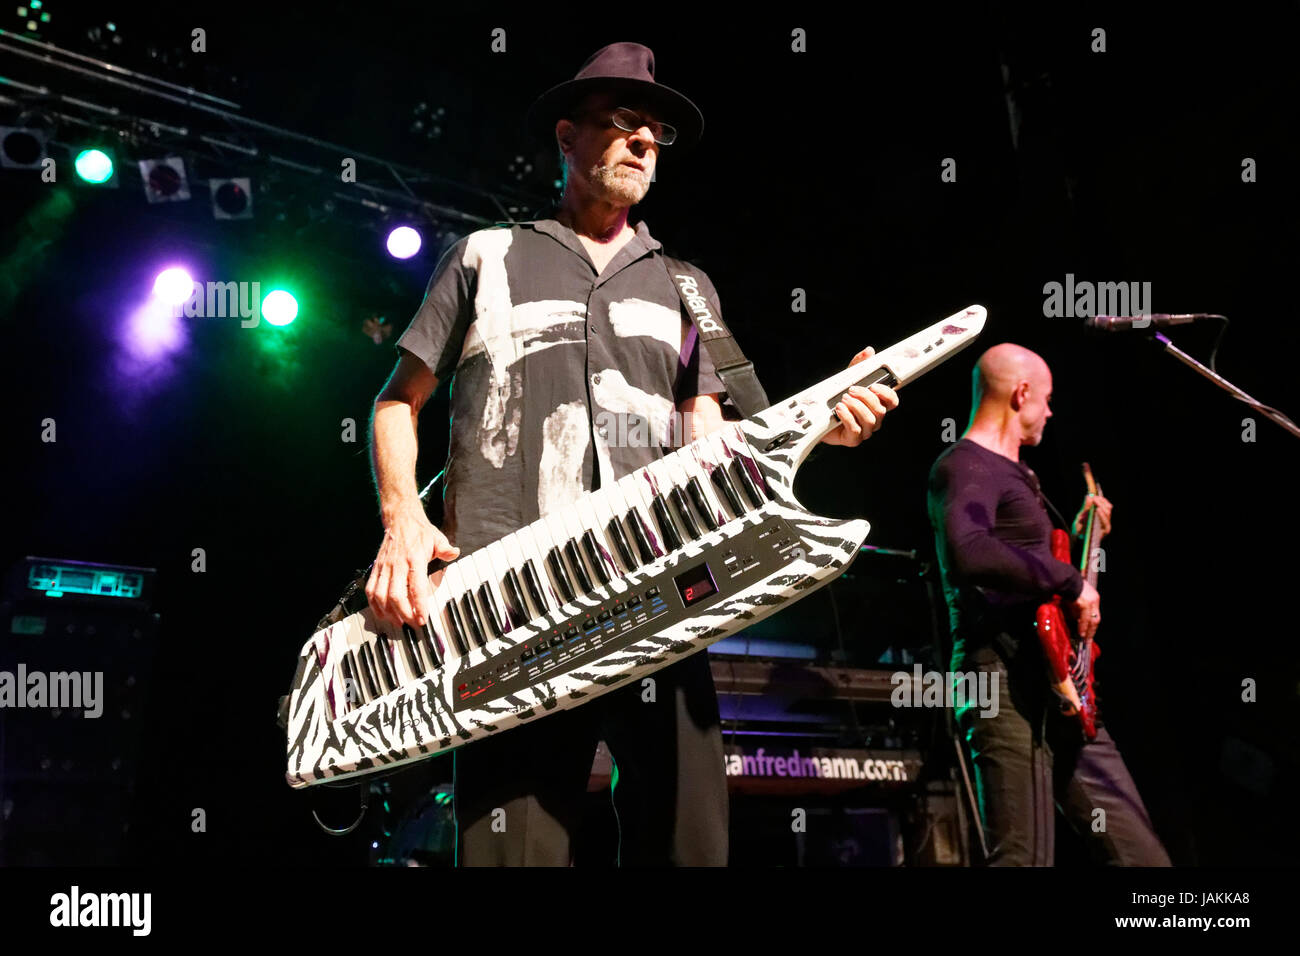 Manfred Manns Earthband, Keyboarder Manfred Mann von Manfred Manns  Earthband im Konzertim LKA-Stuttgart, am 27.10.2013 Stock Photo - Alamy